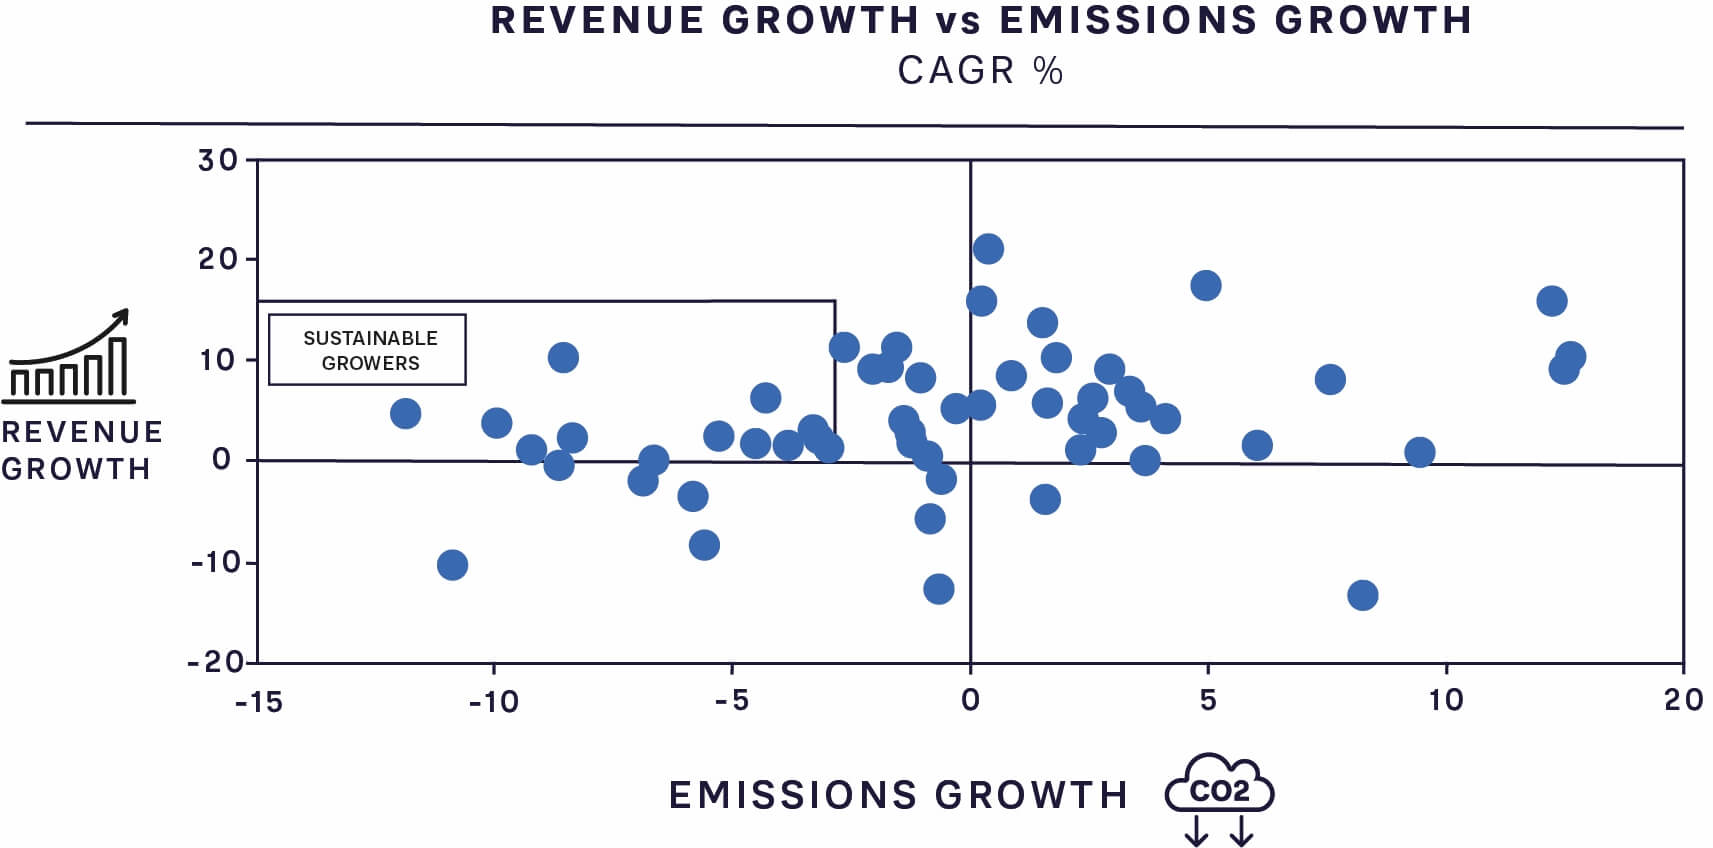 REVENUE GROWTH VERSUS EMISSIONS GROWTH IN CAGR (%)